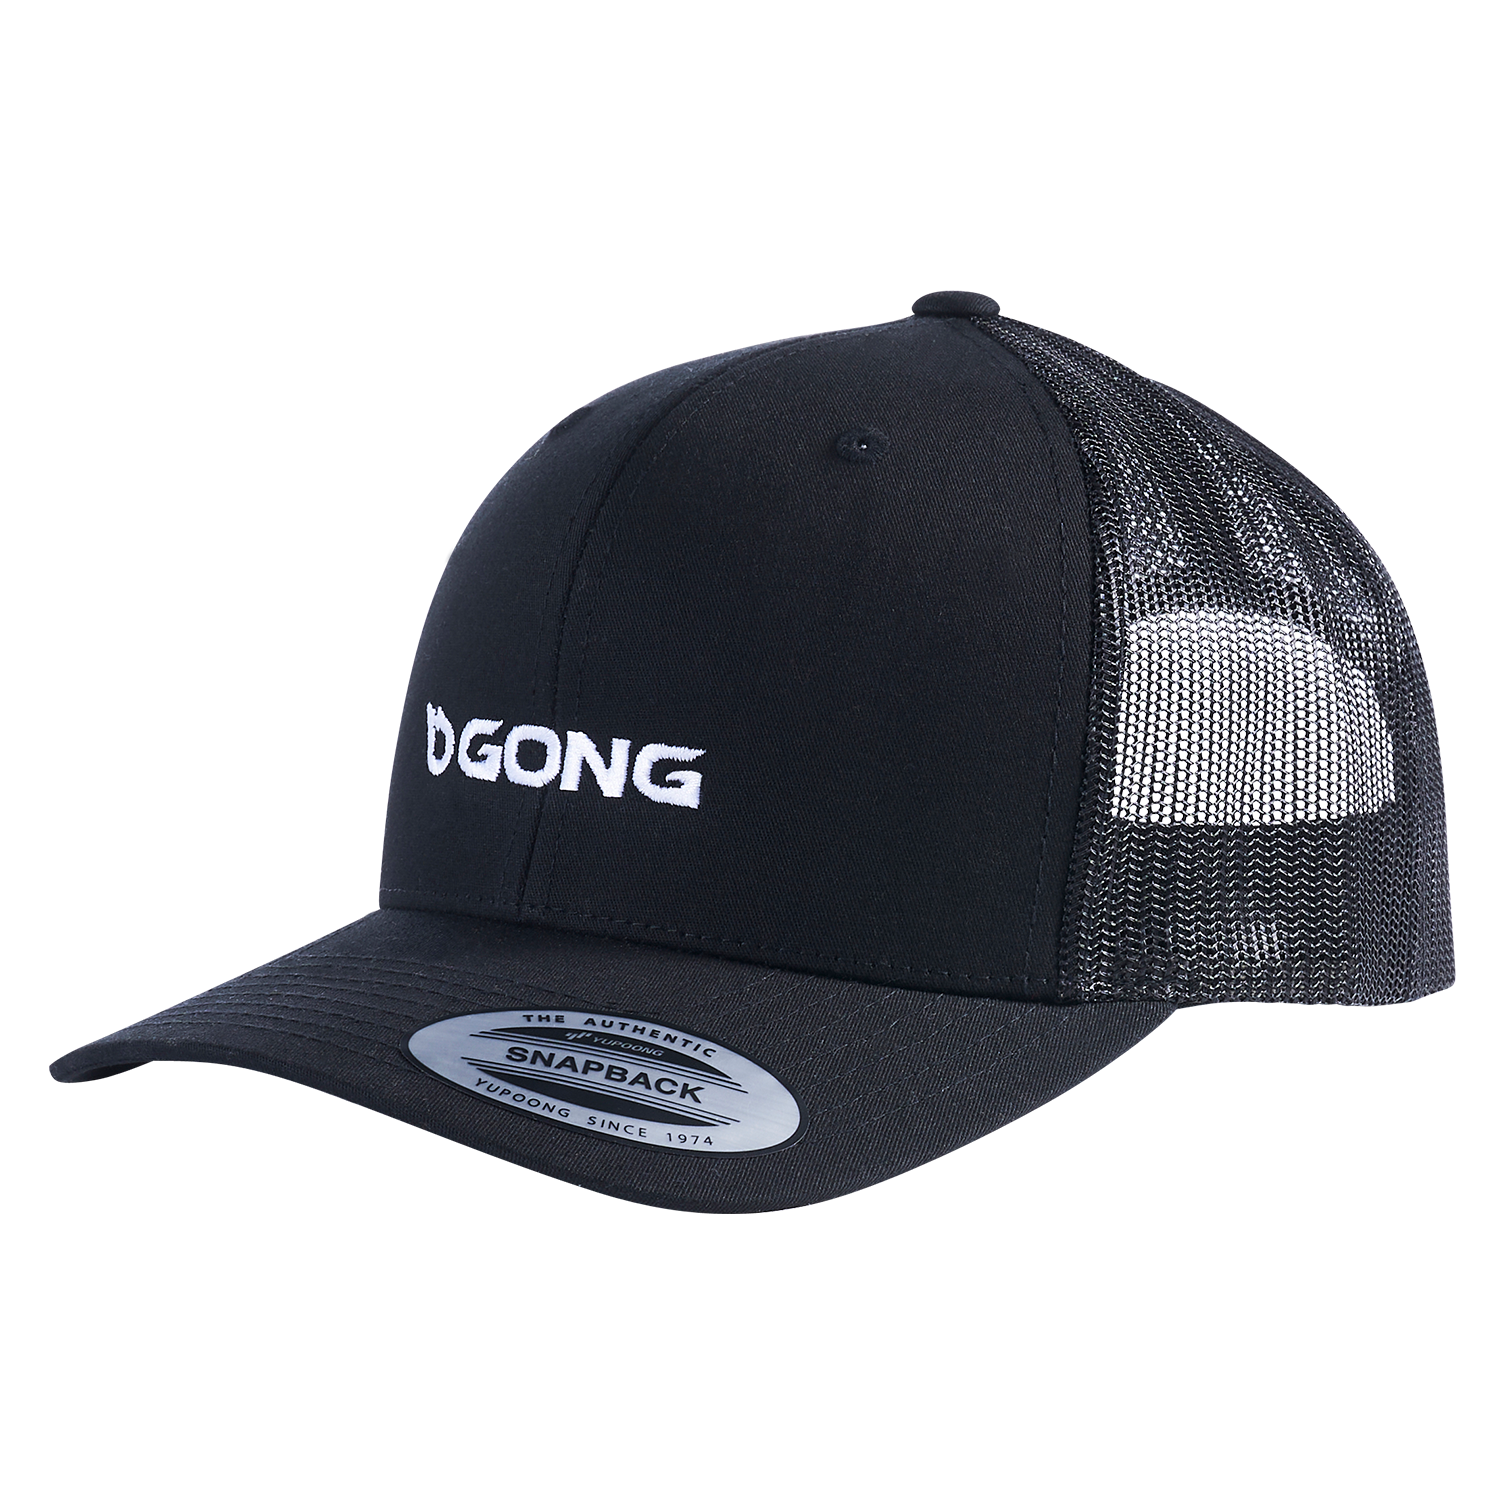 GONG | Casquette Trucker Iconic